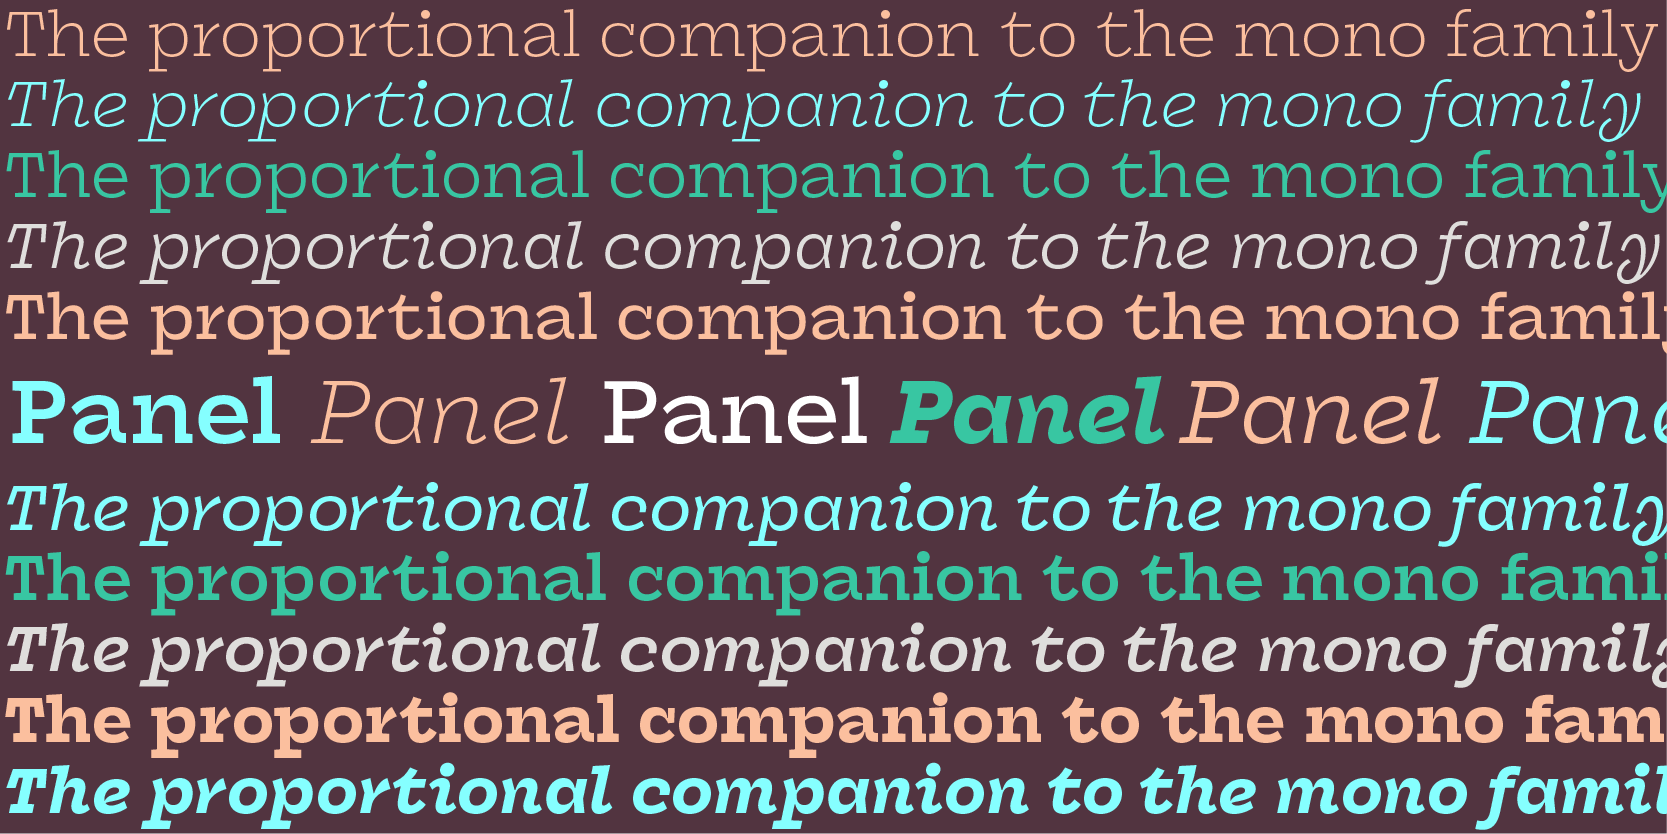 Card displaying Panel typeface in various styles